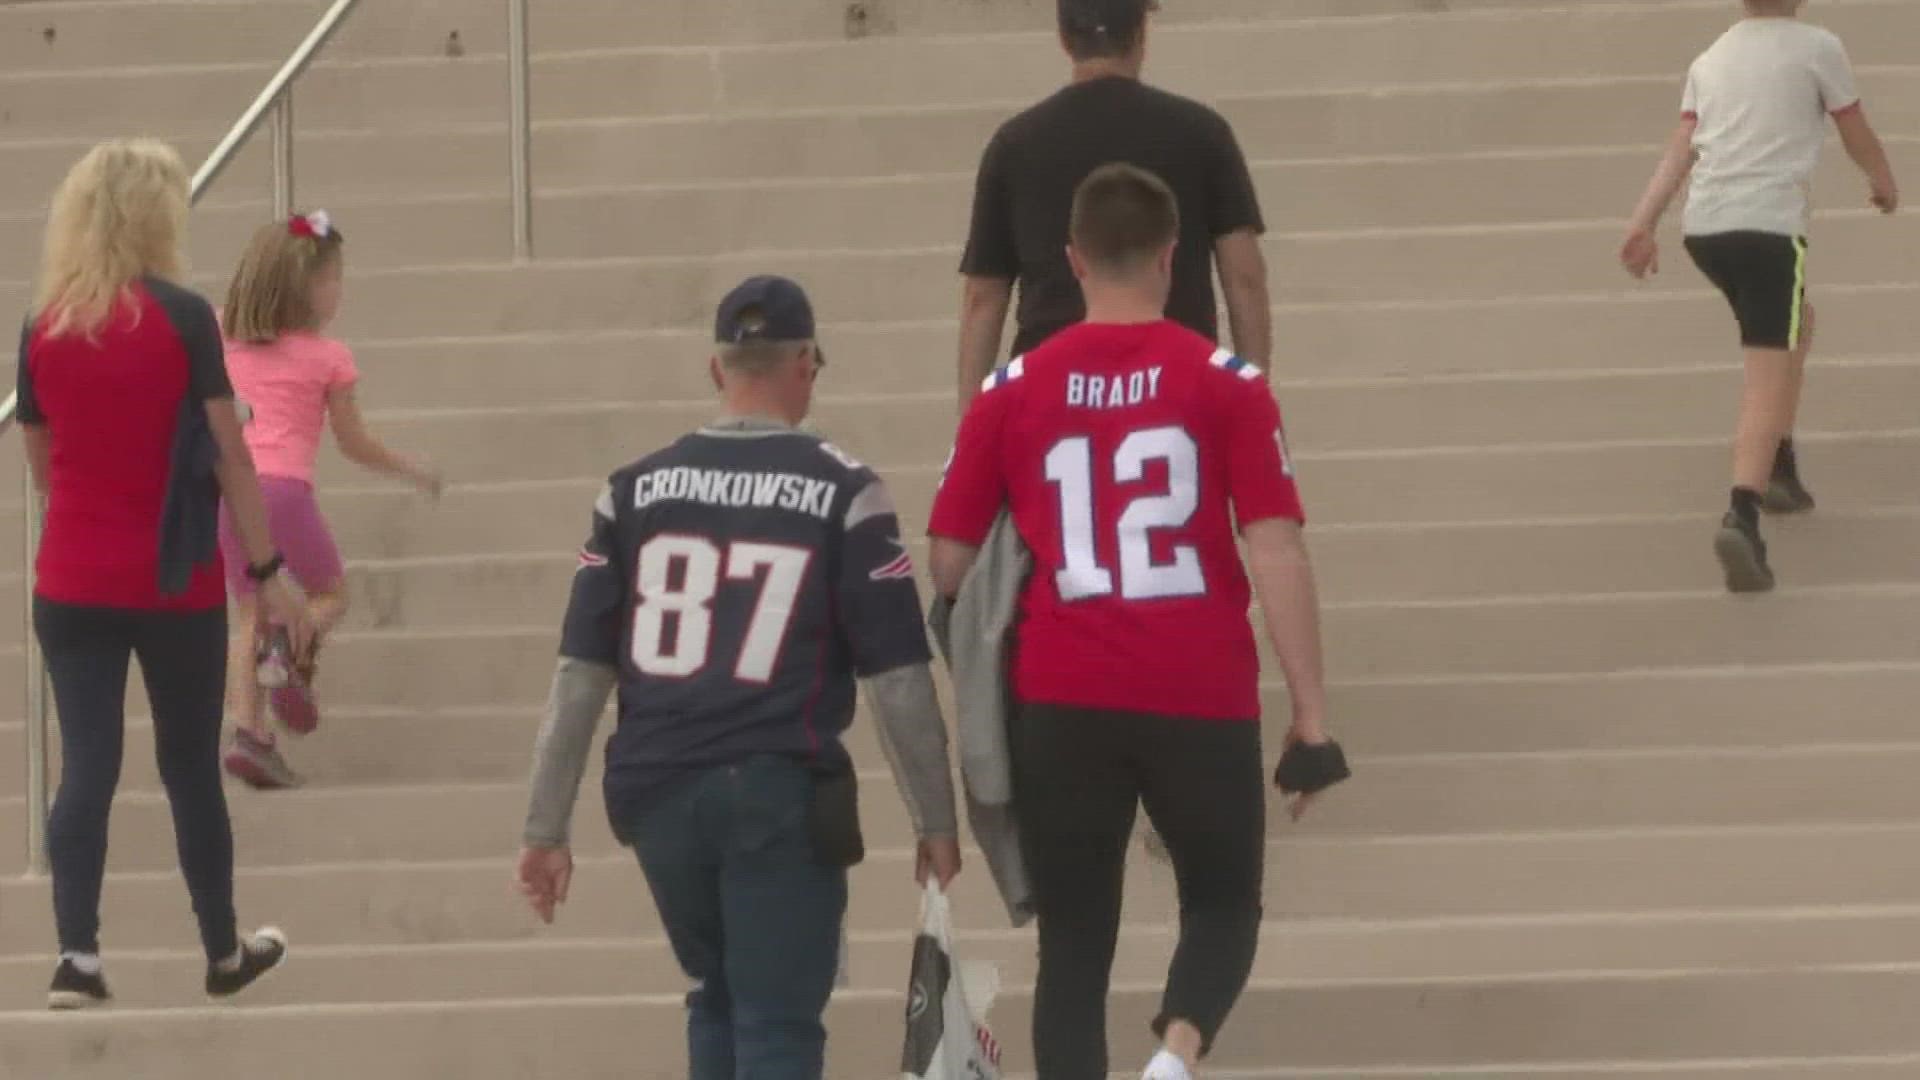 As Tom Brady makes a long-awaited return to Gillette Stadium to play his former team, some fans are torn over whether to support the GOAT or the home team.